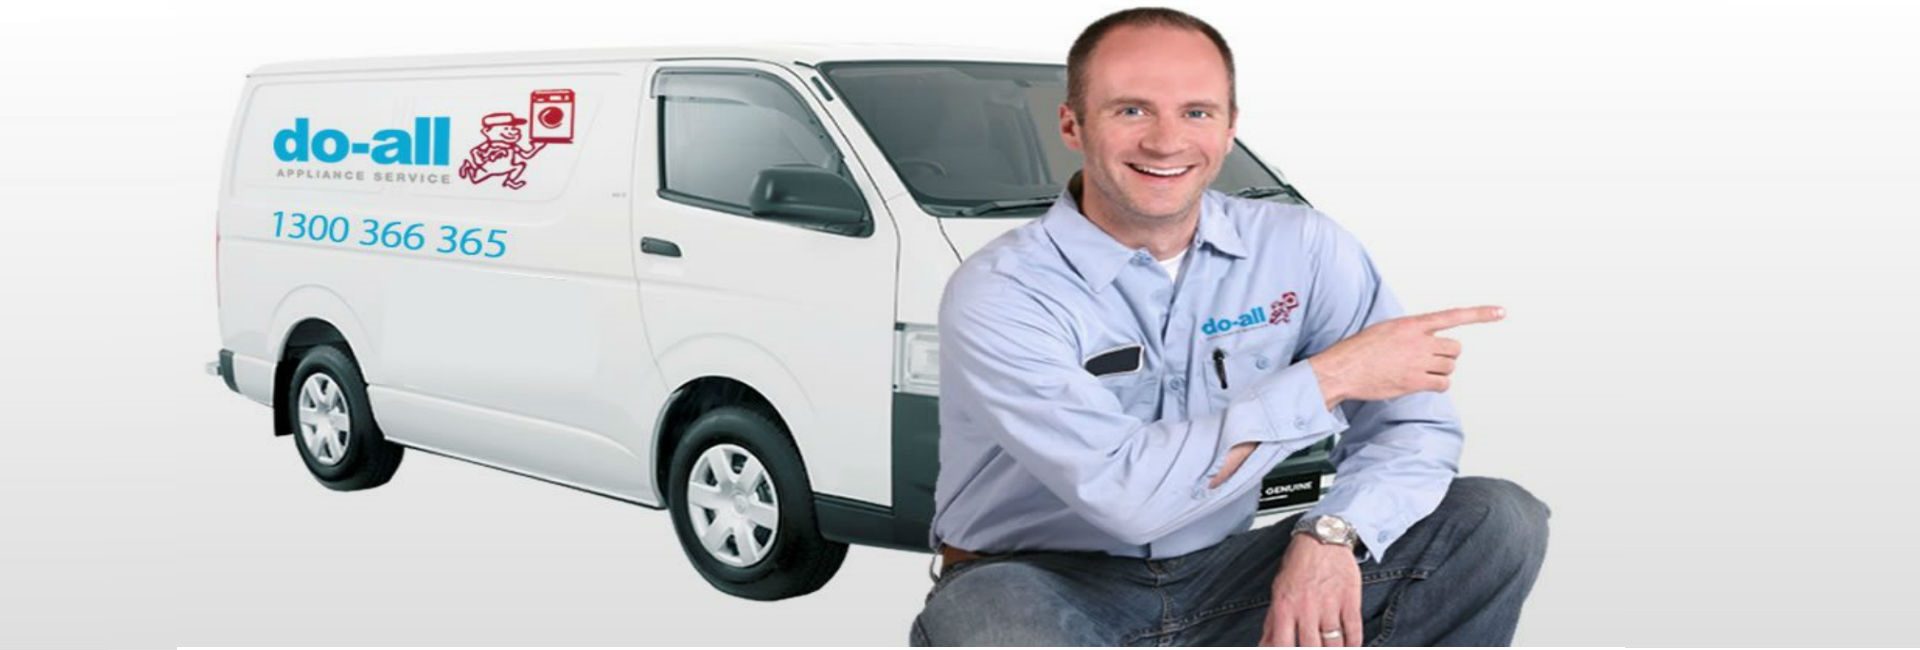 Melbourne's leading appliance servicing and repair people